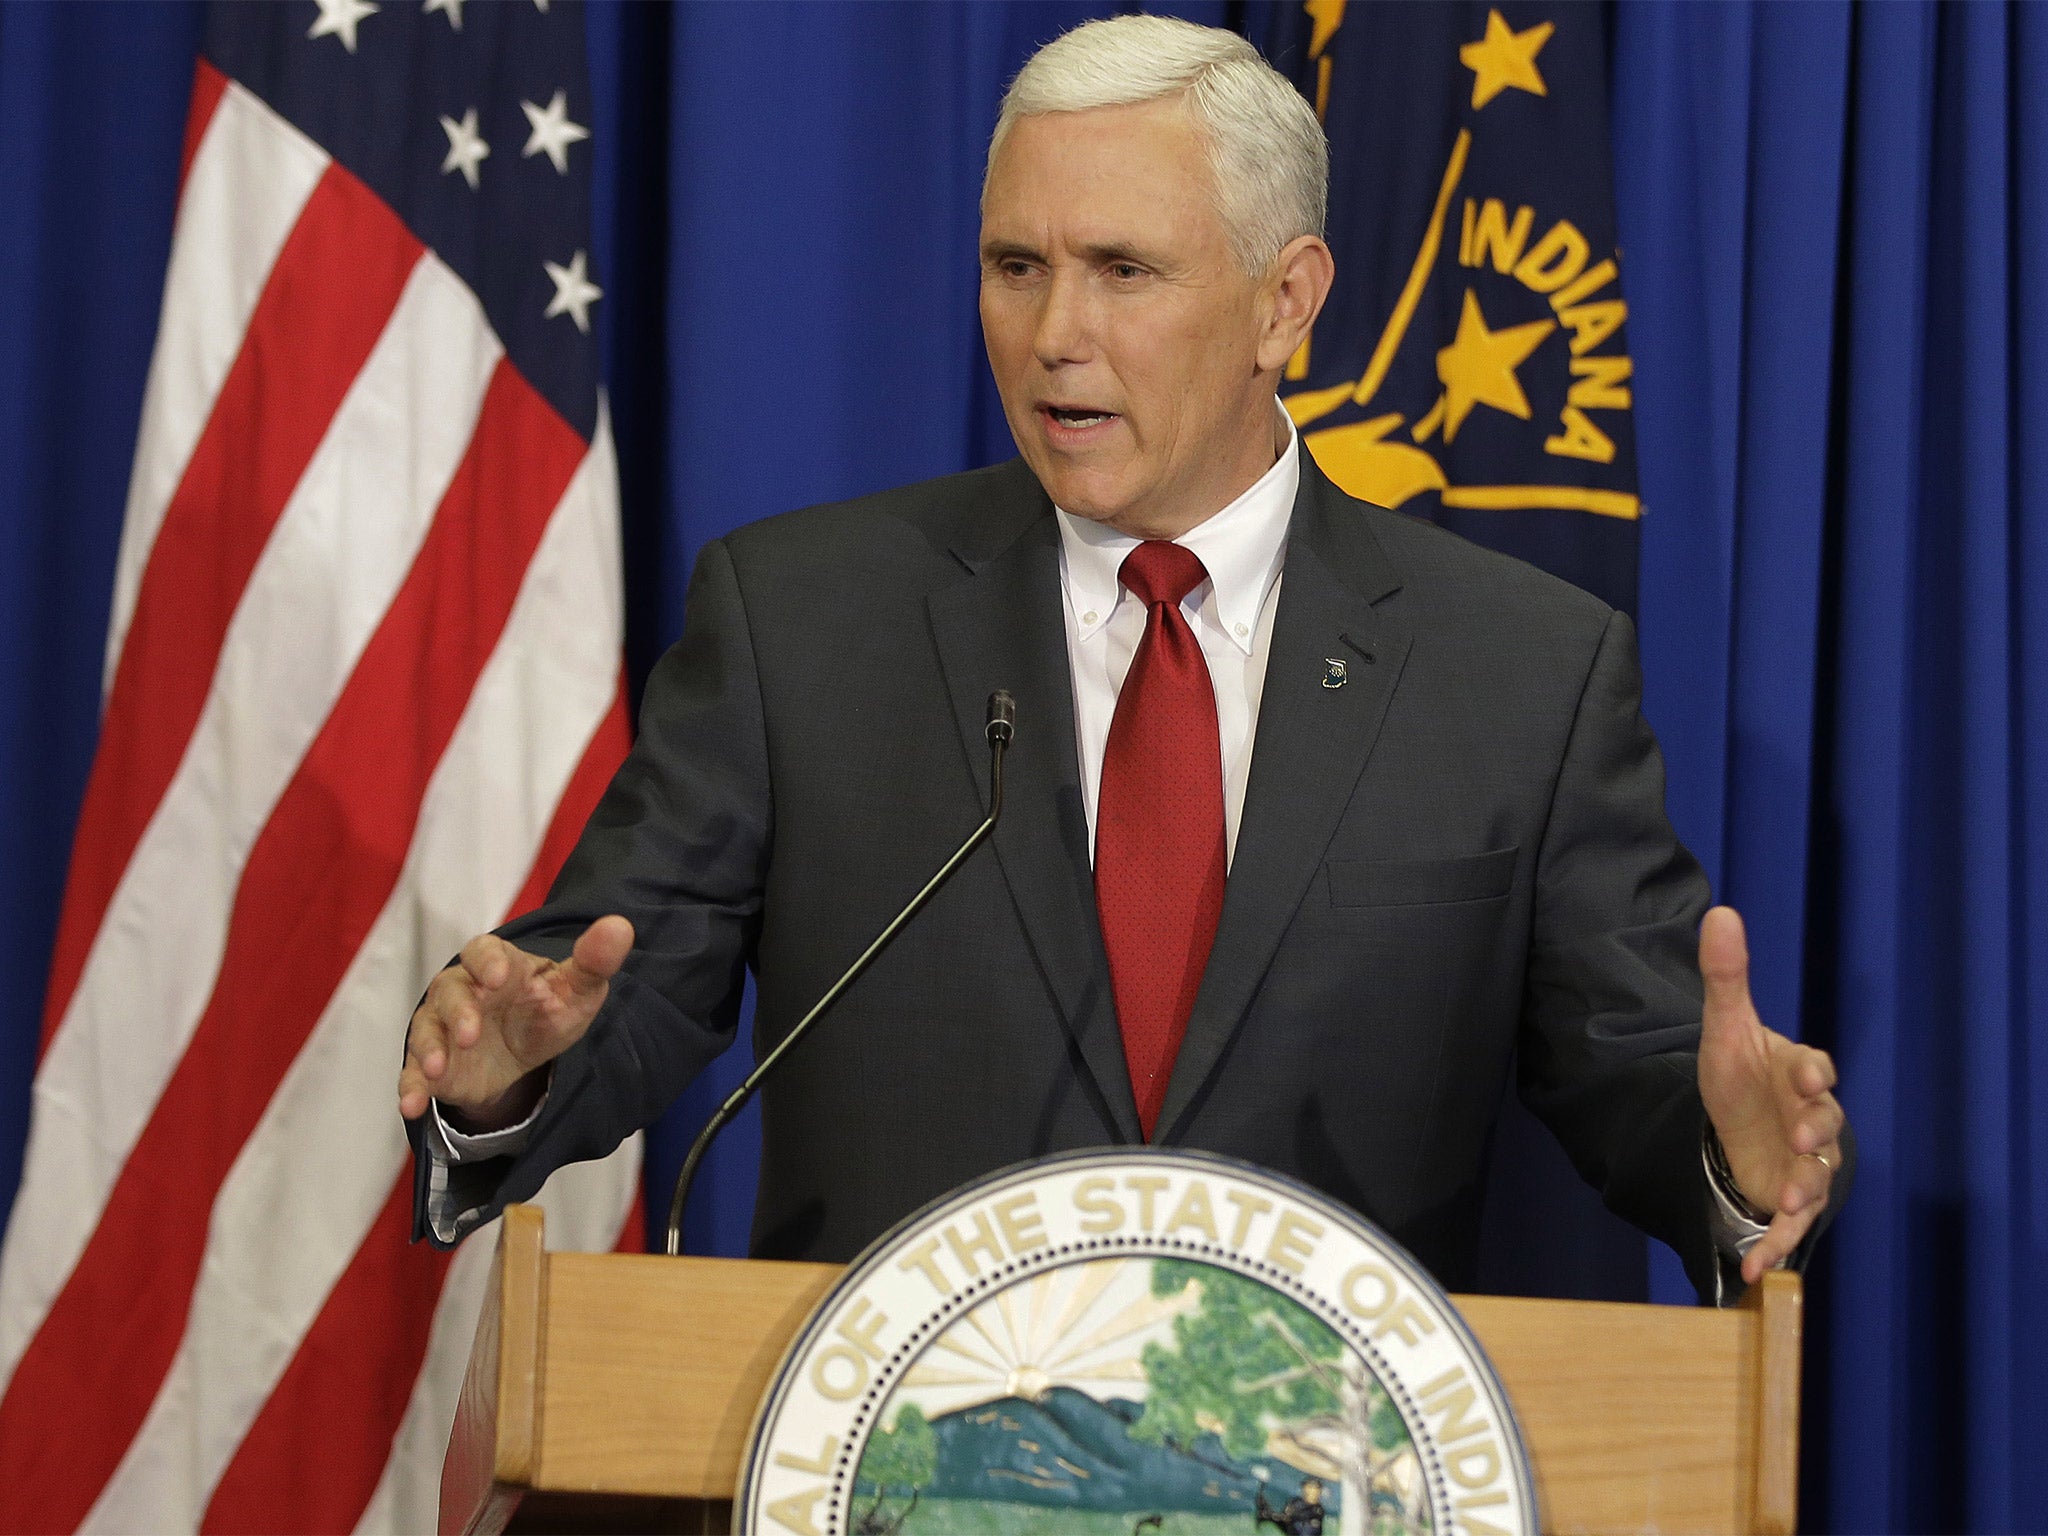 Indiana Governor Mike Pence speaking to the media in Indianapolis on Tuesday